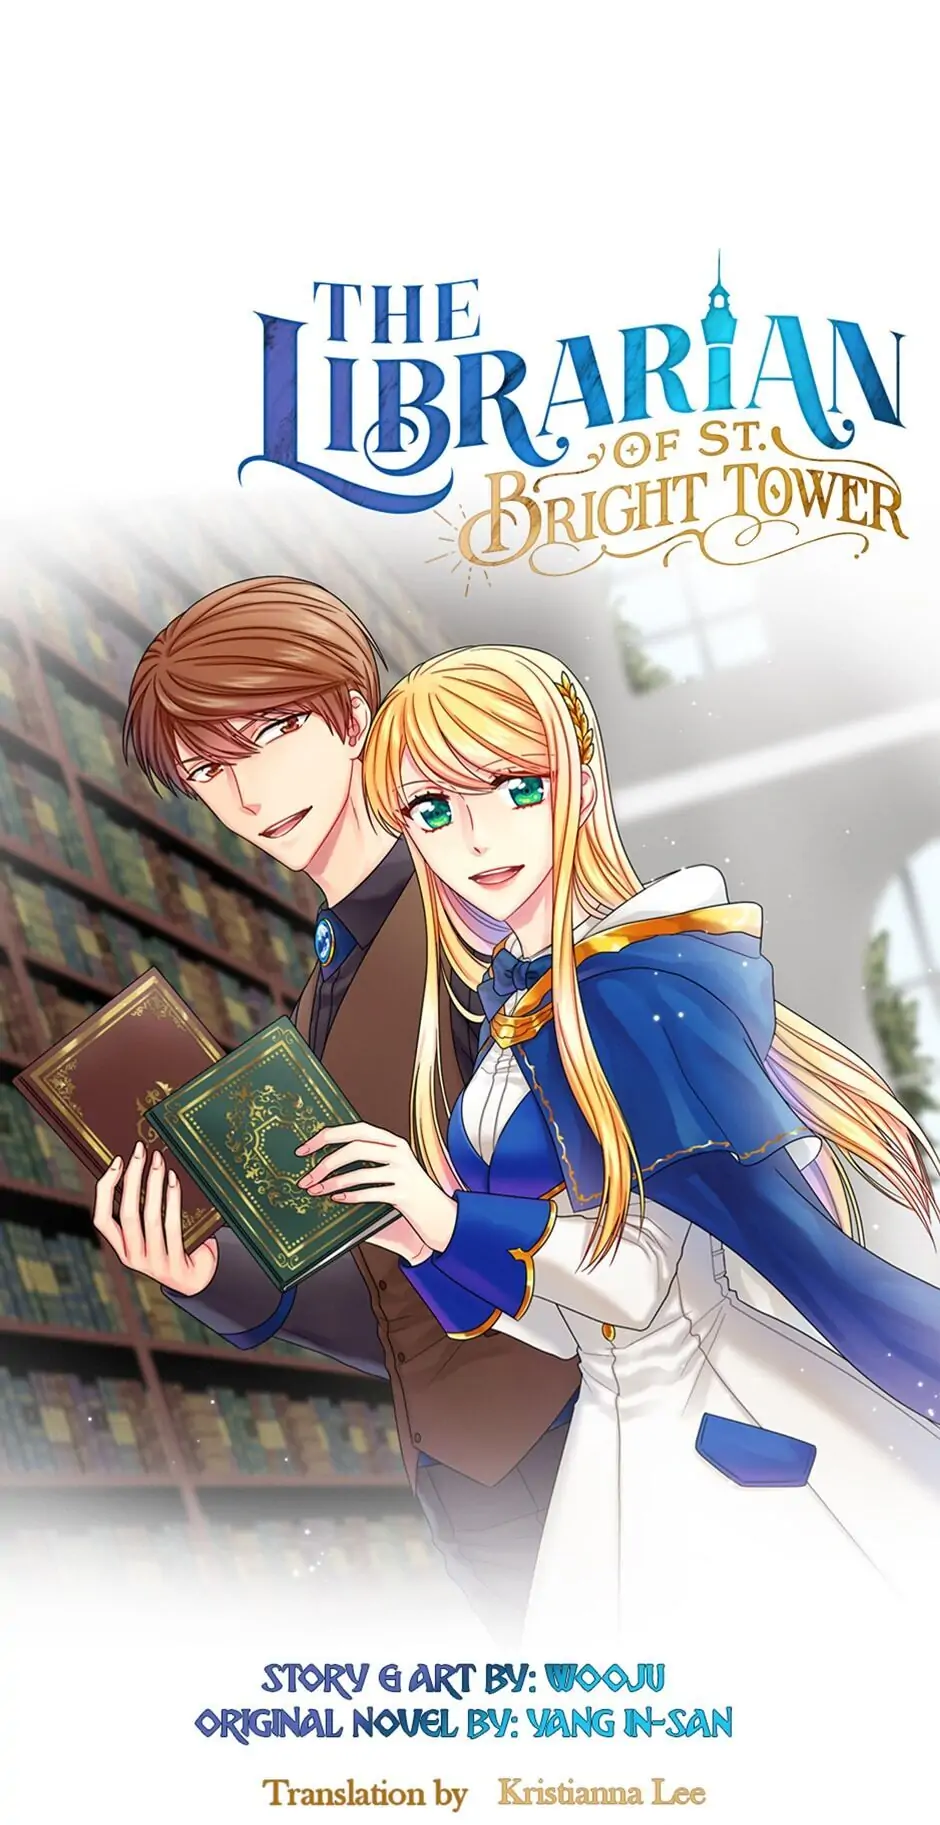 The Magic Tower Librarian chapter 20